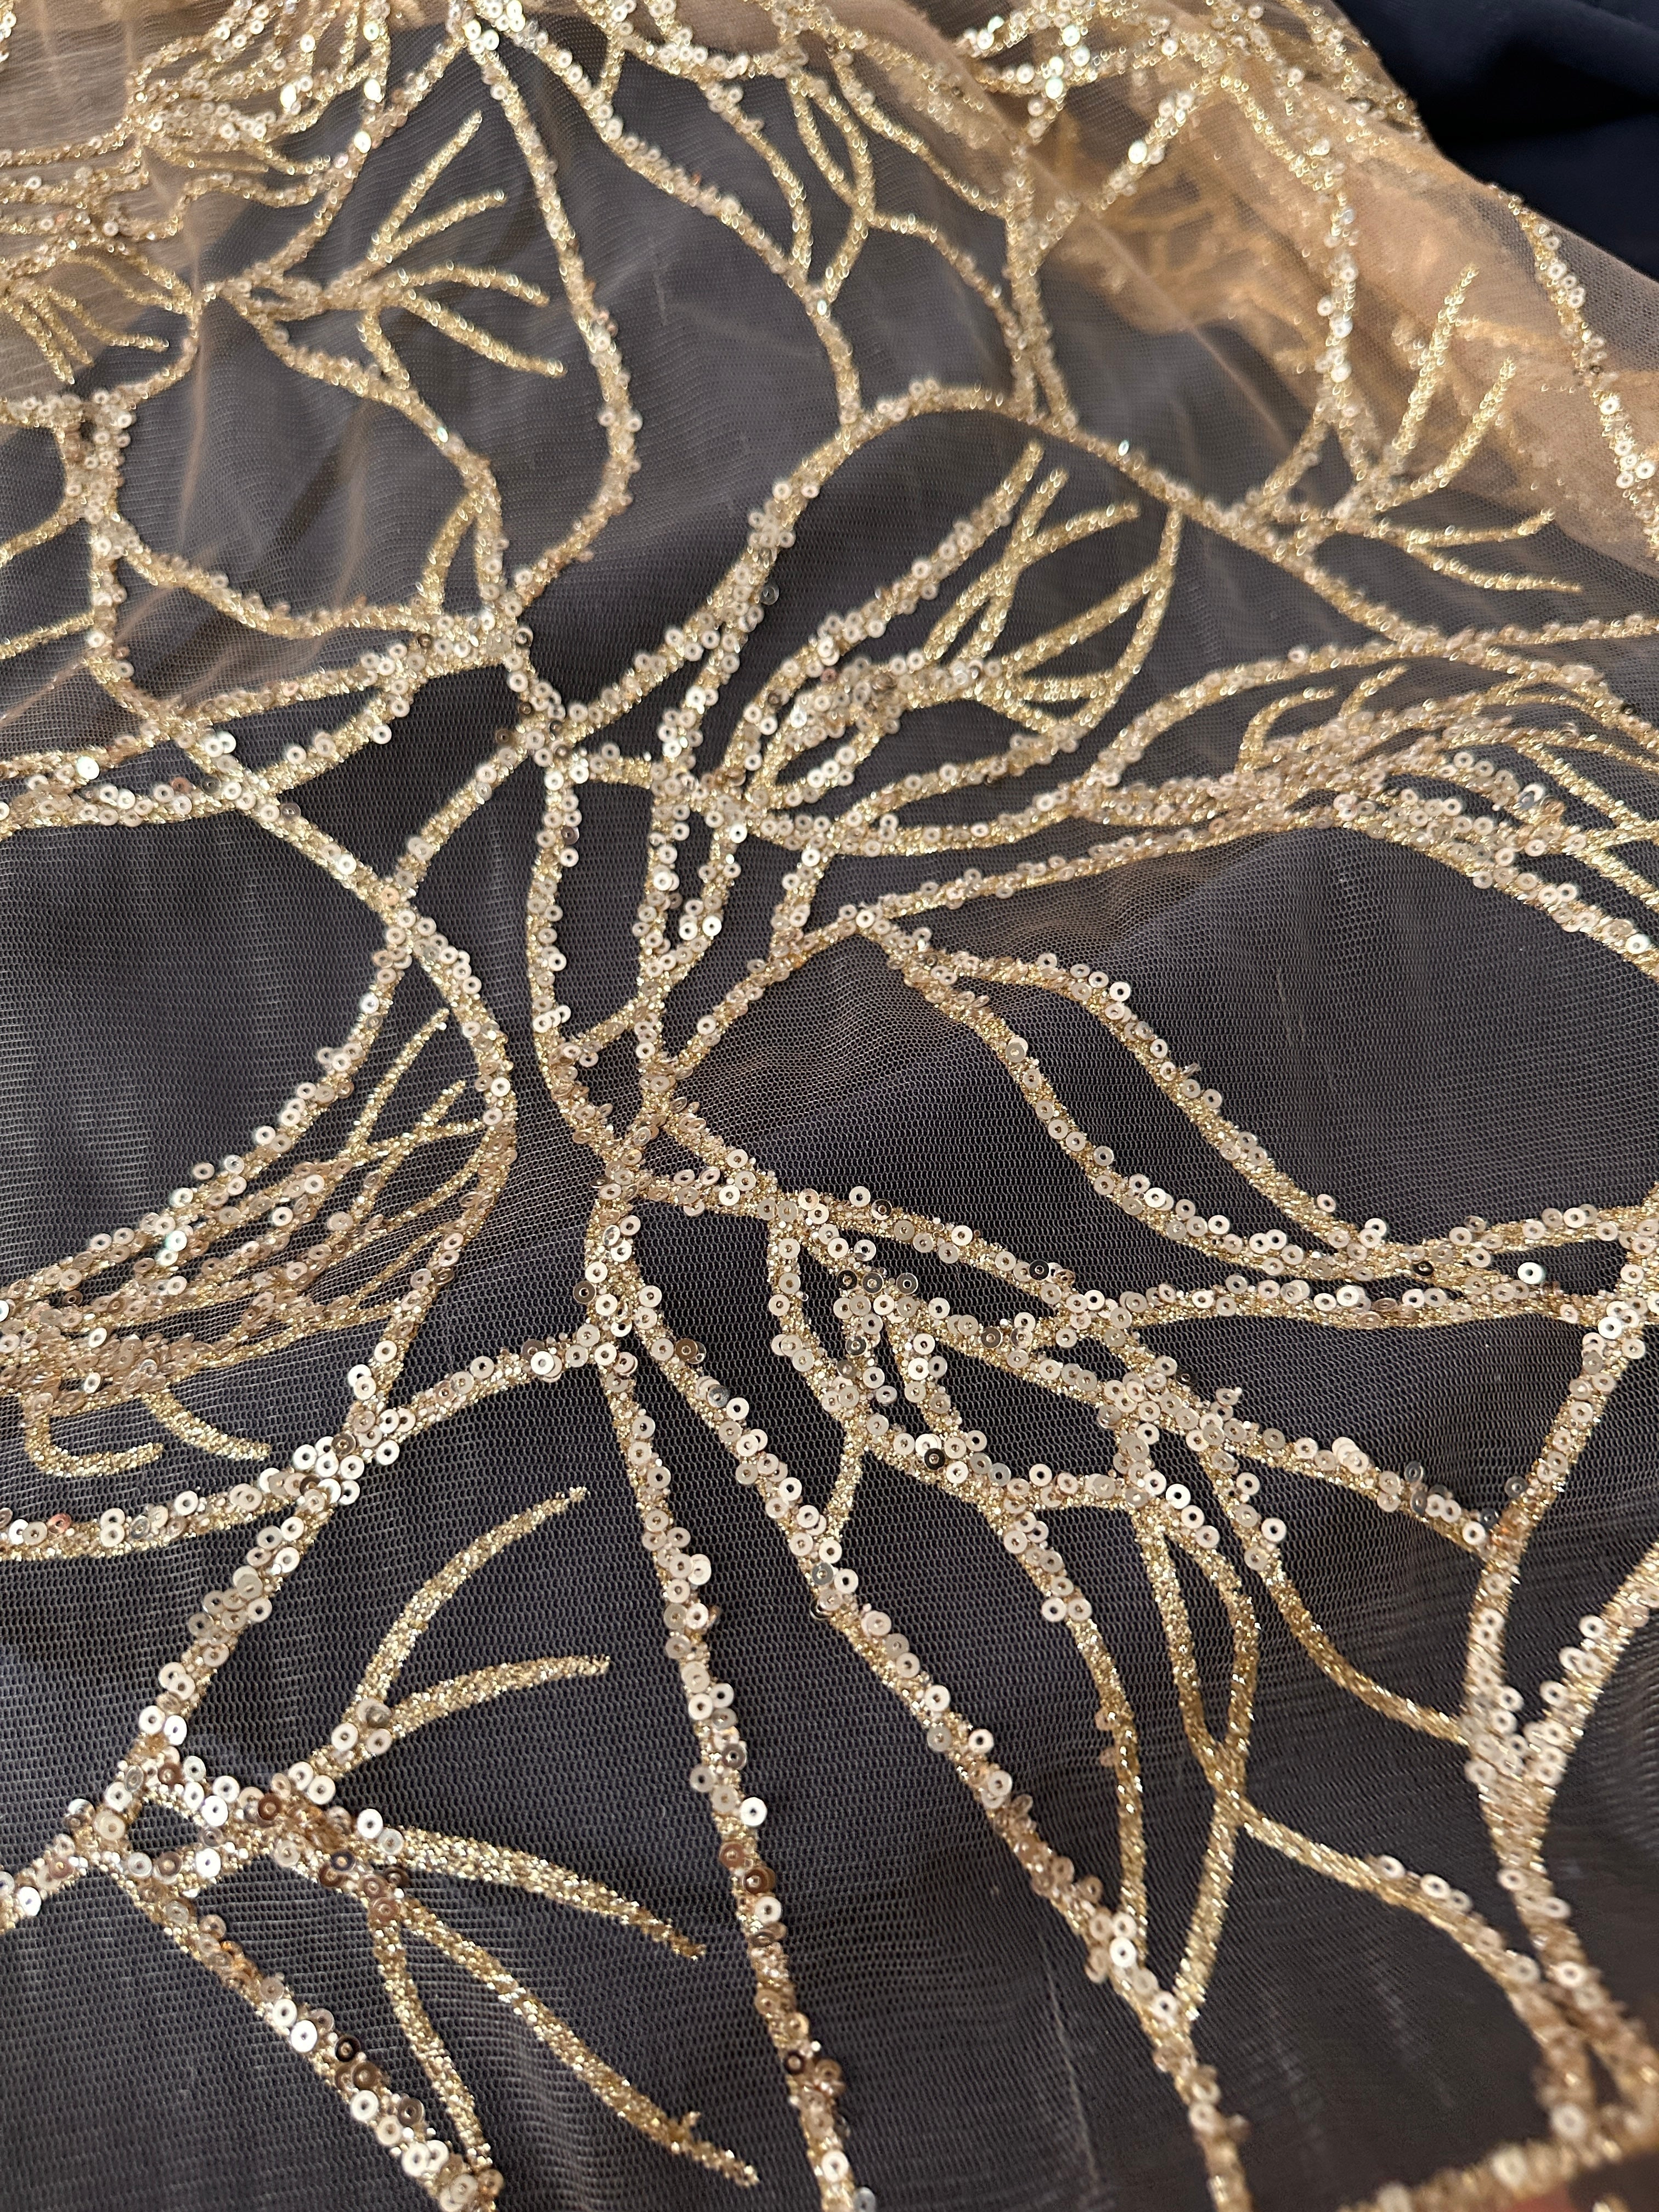 Gold Glitter Branch Design Lace Fabric, Geometric Gold Stretch Lace on Mesh, Shimmer Gold lace for gown, Bridal Lace, Gold Webbed Lace, lace for woman, lace on discount, lace on sale, premium lace fabric, buy lace fabric online